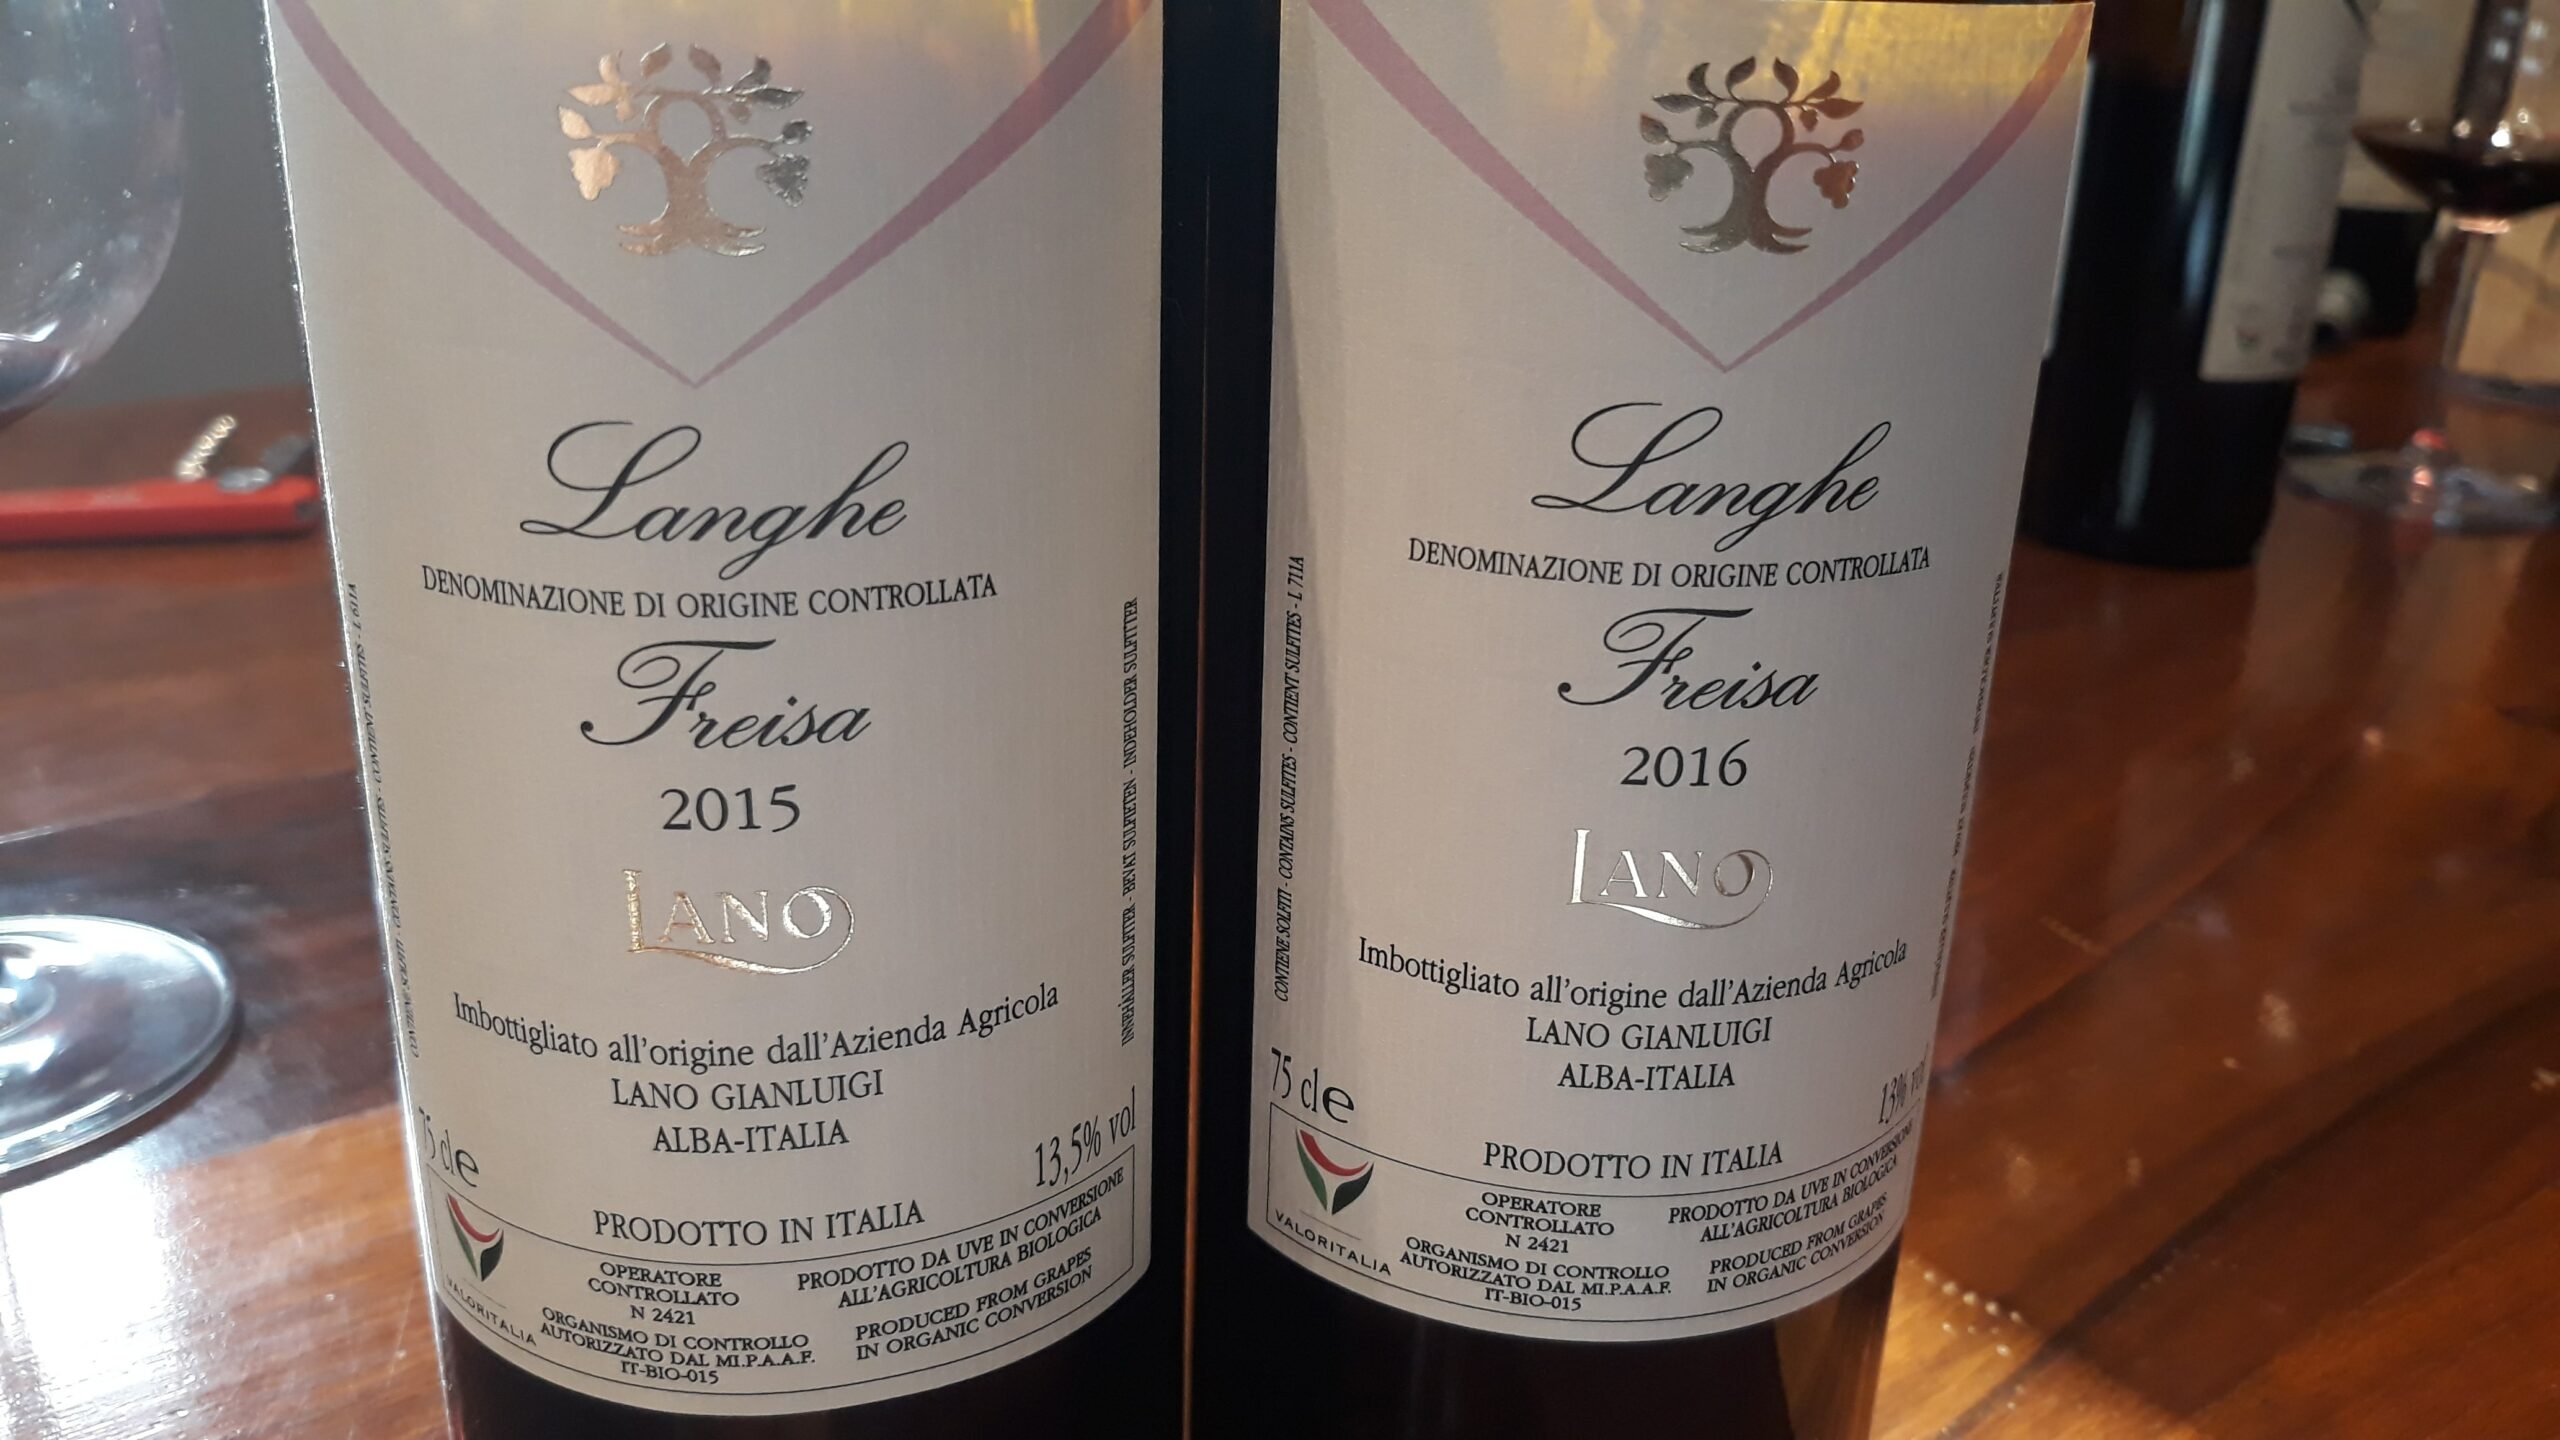 Freisa-wines-really-did-not-get-much-better-than-those-of-Lano-in2020-min-scaled-1-3-1